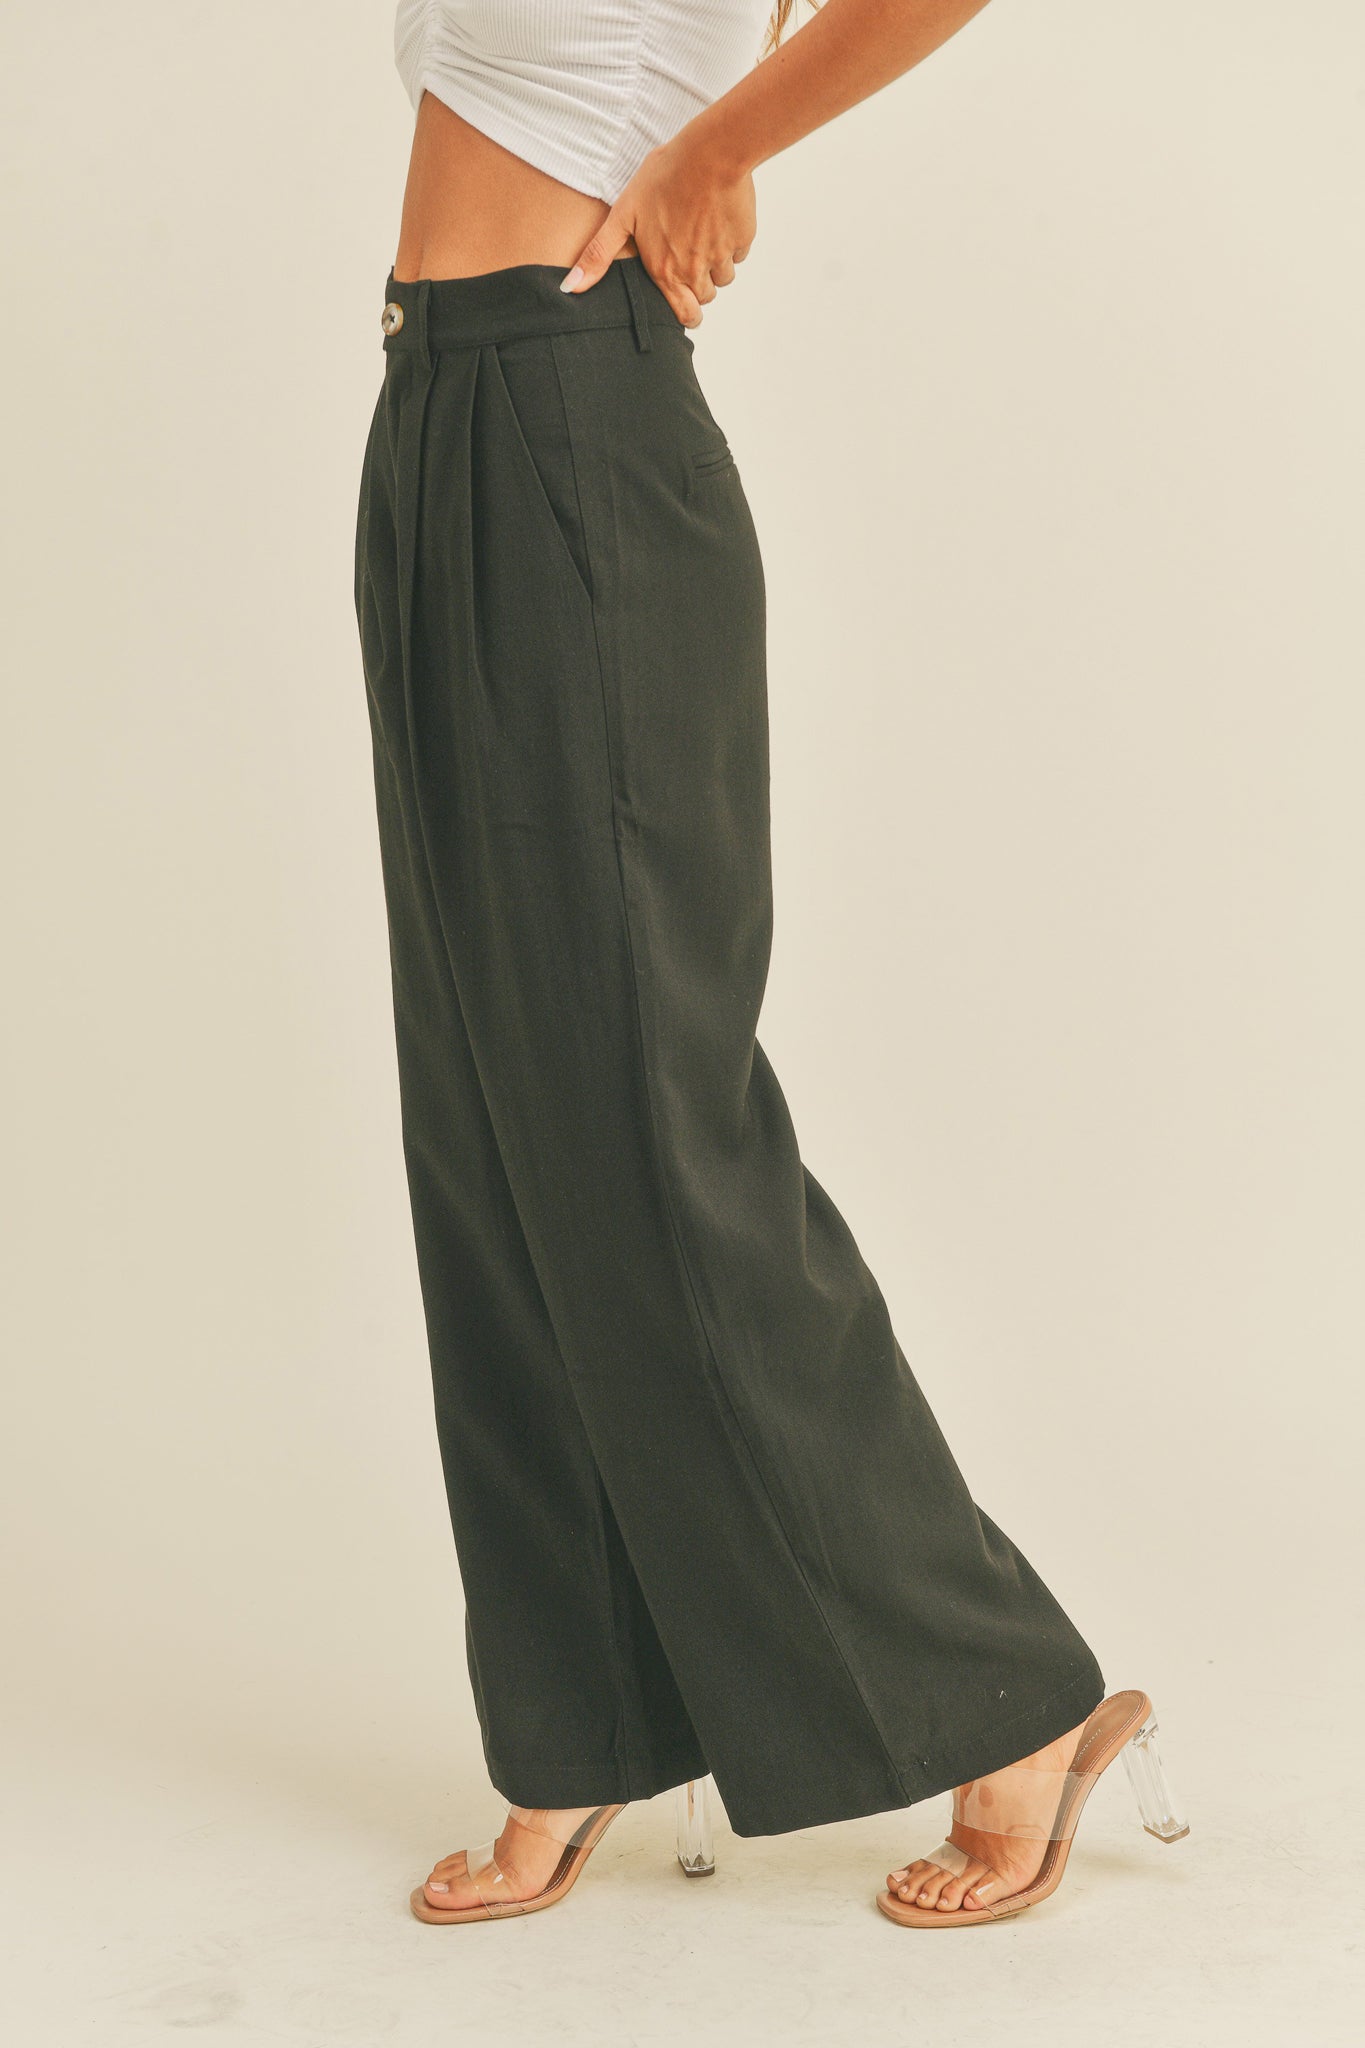 View 2 of Arid Trousers in Black, a Pants from Larrea Cove. Detail: .